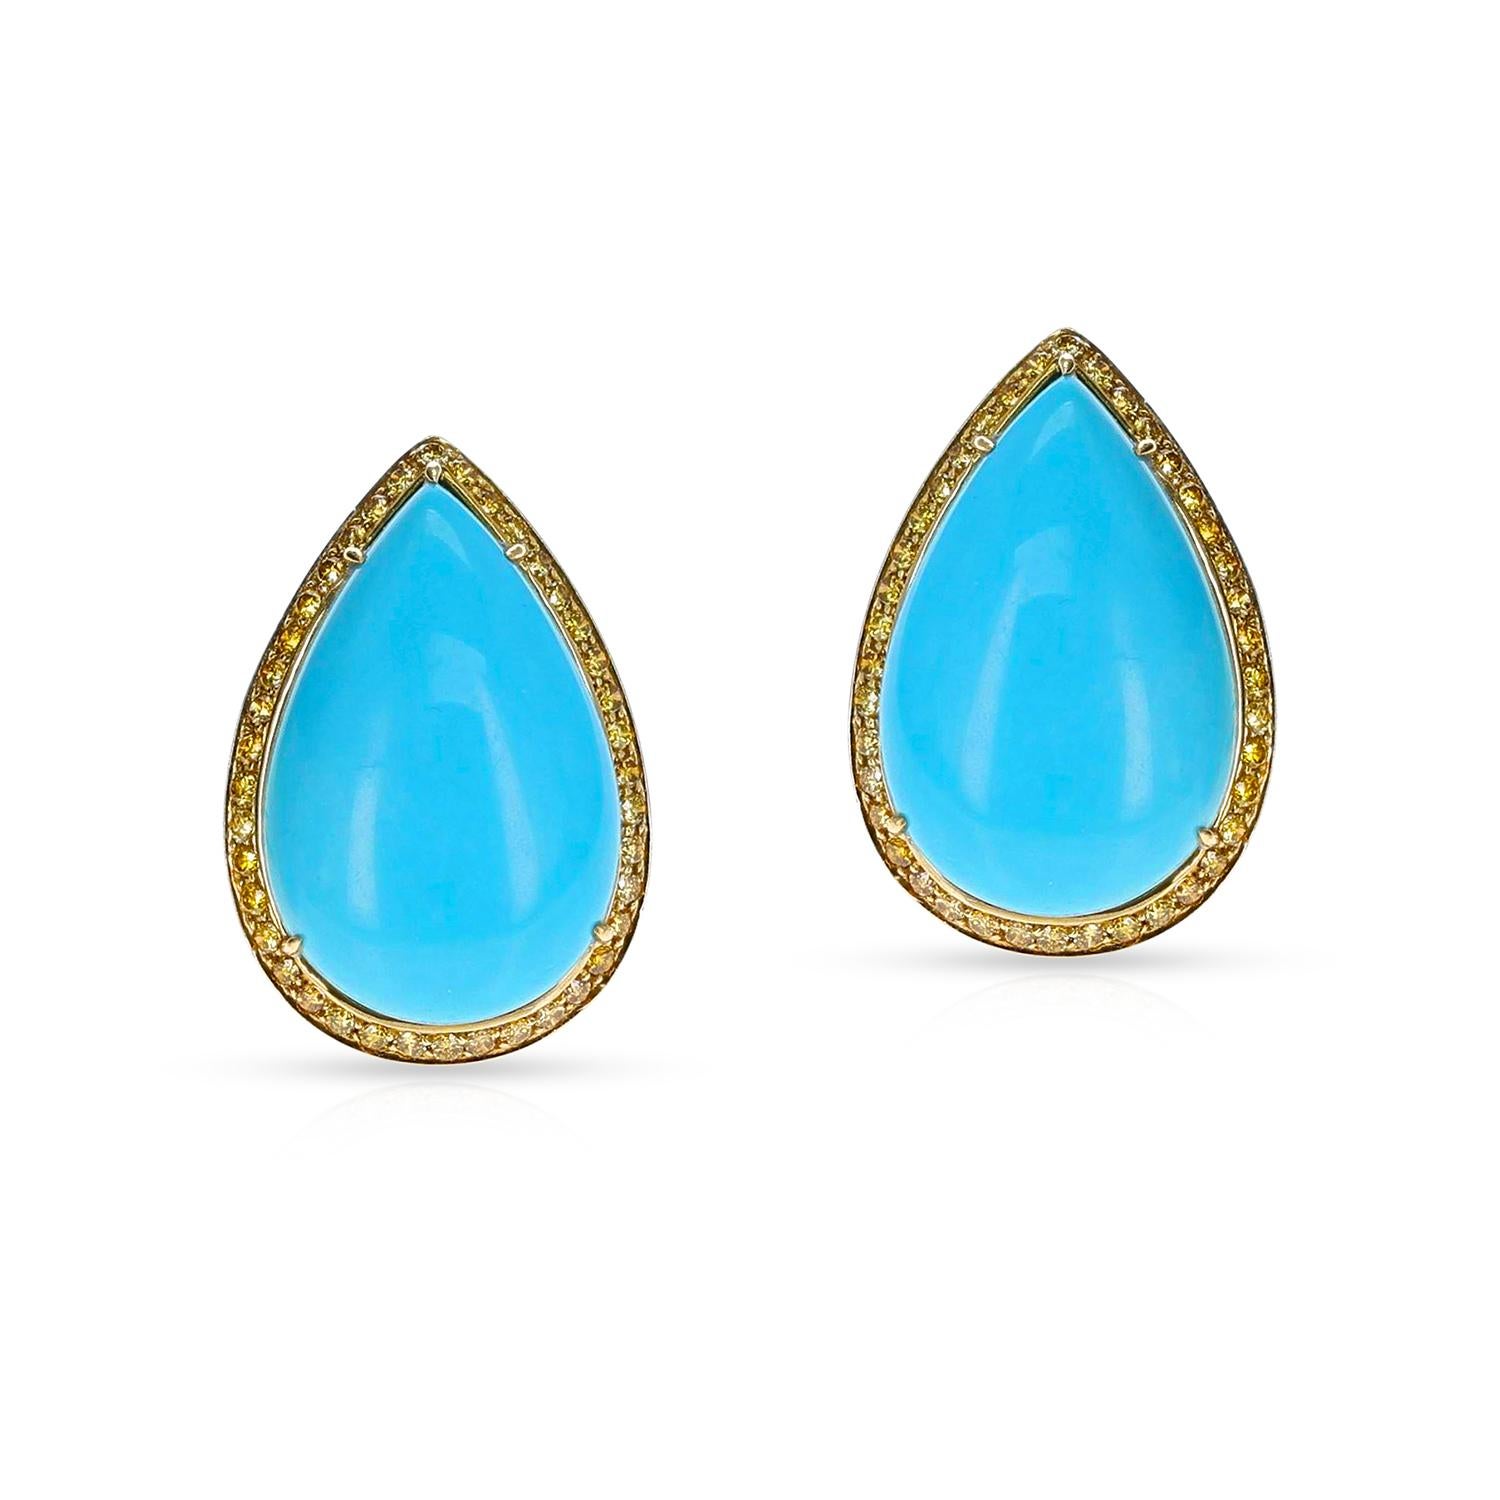 A pair of GIA certified pear-shaped sleeping beauty turquoise cabochons with a border of brilliant-cut diamonds of yellow shade. The diamond weight is appx. 2.55 carats, signed PC, mounted in 18k gold. The total weight is 28.75 grams. Length: 1.29